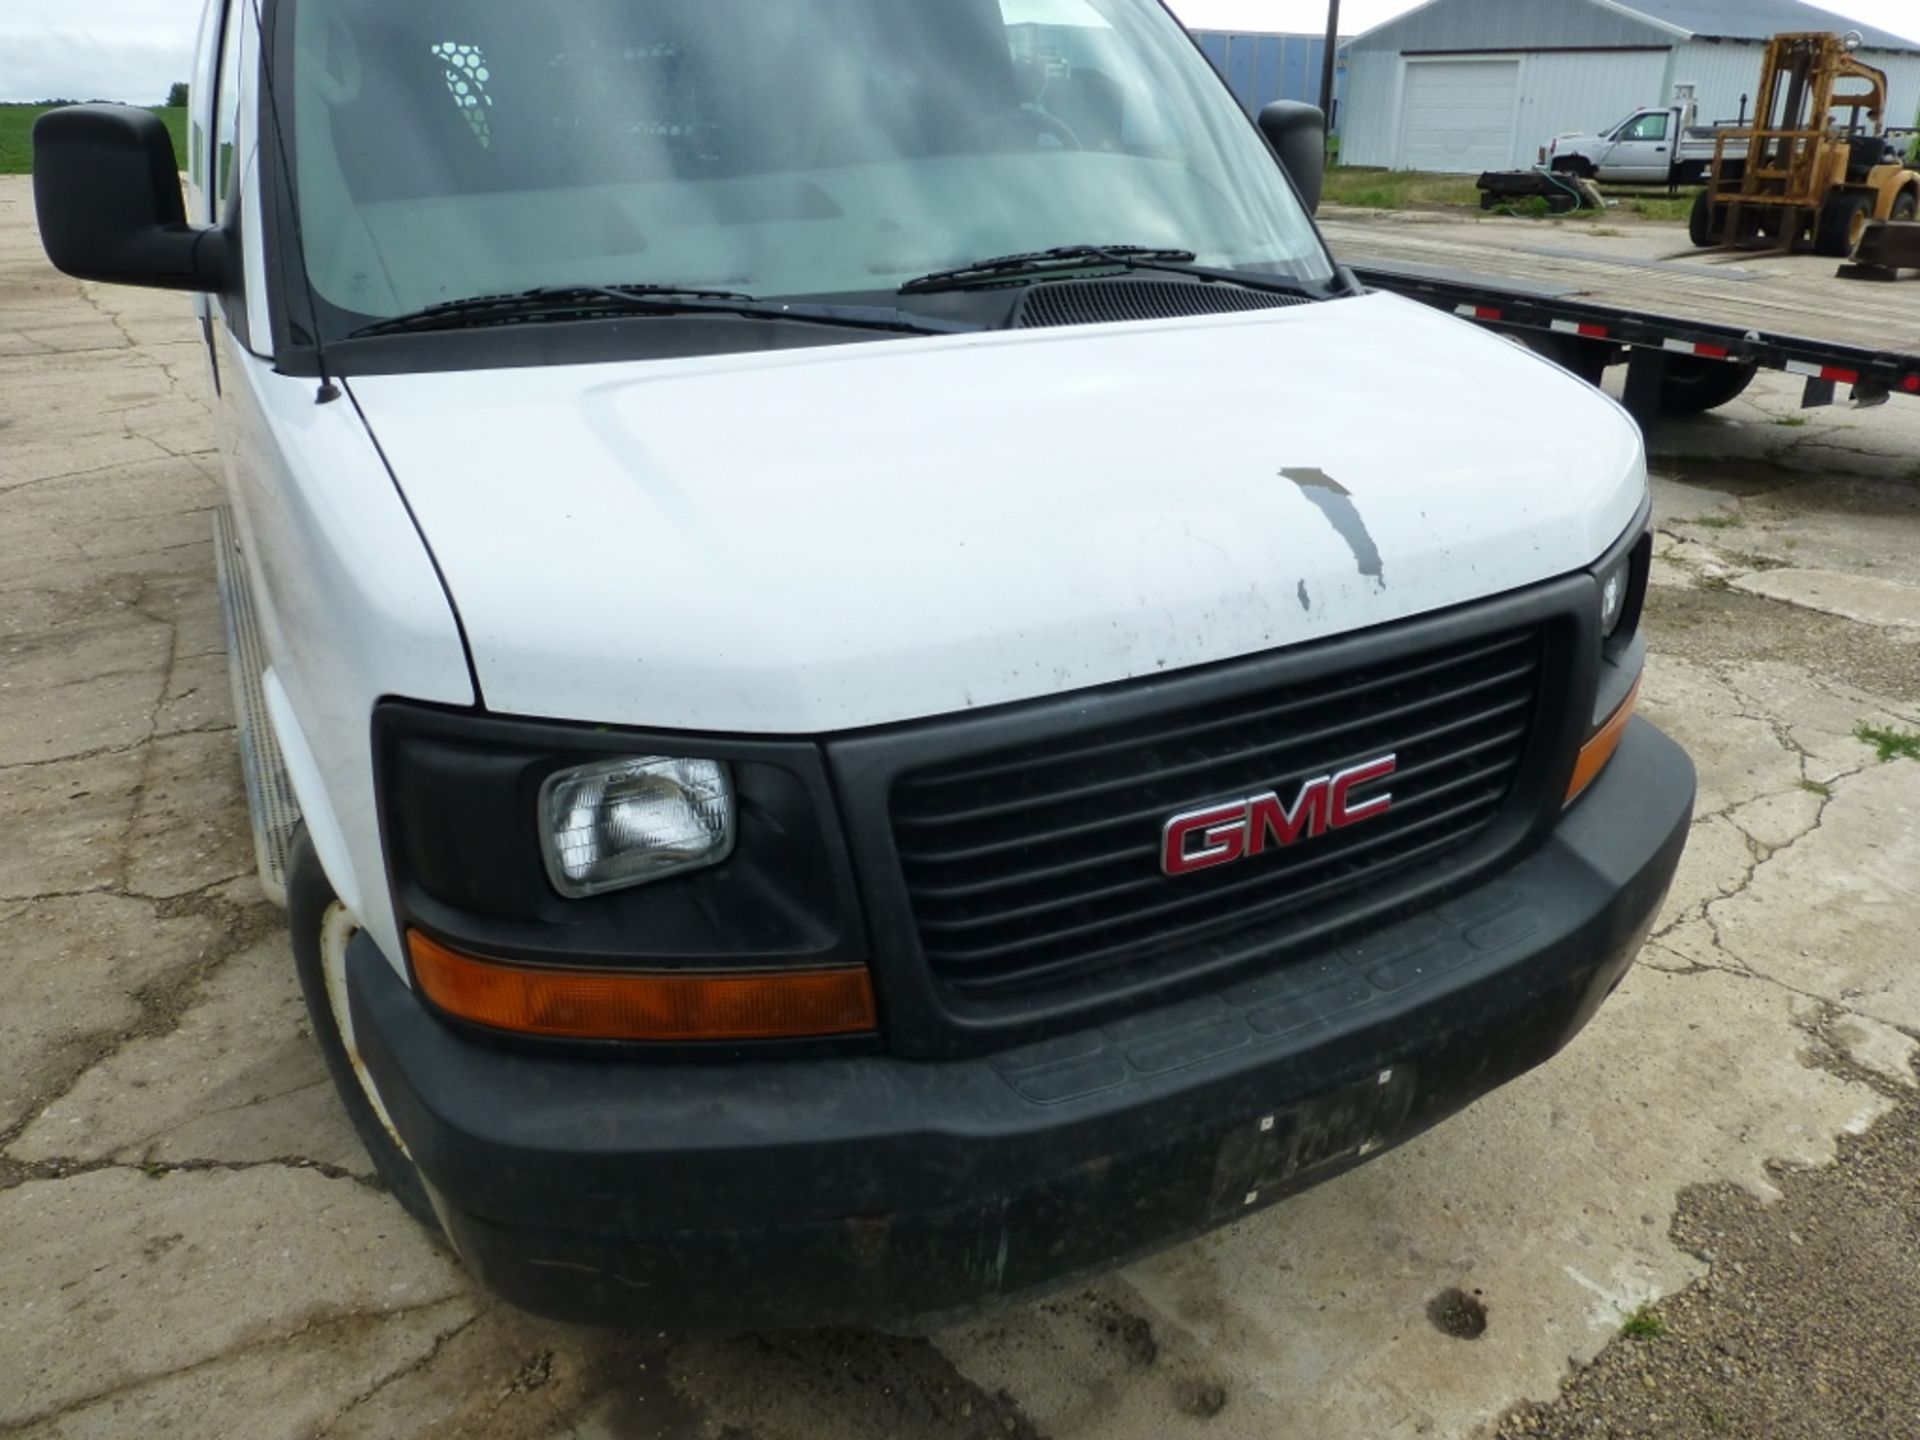 2008 GMC Cargo van, with shelf drawer units, automatic, a.c., manual windows, 254,605 unverified - Image 13 of 22